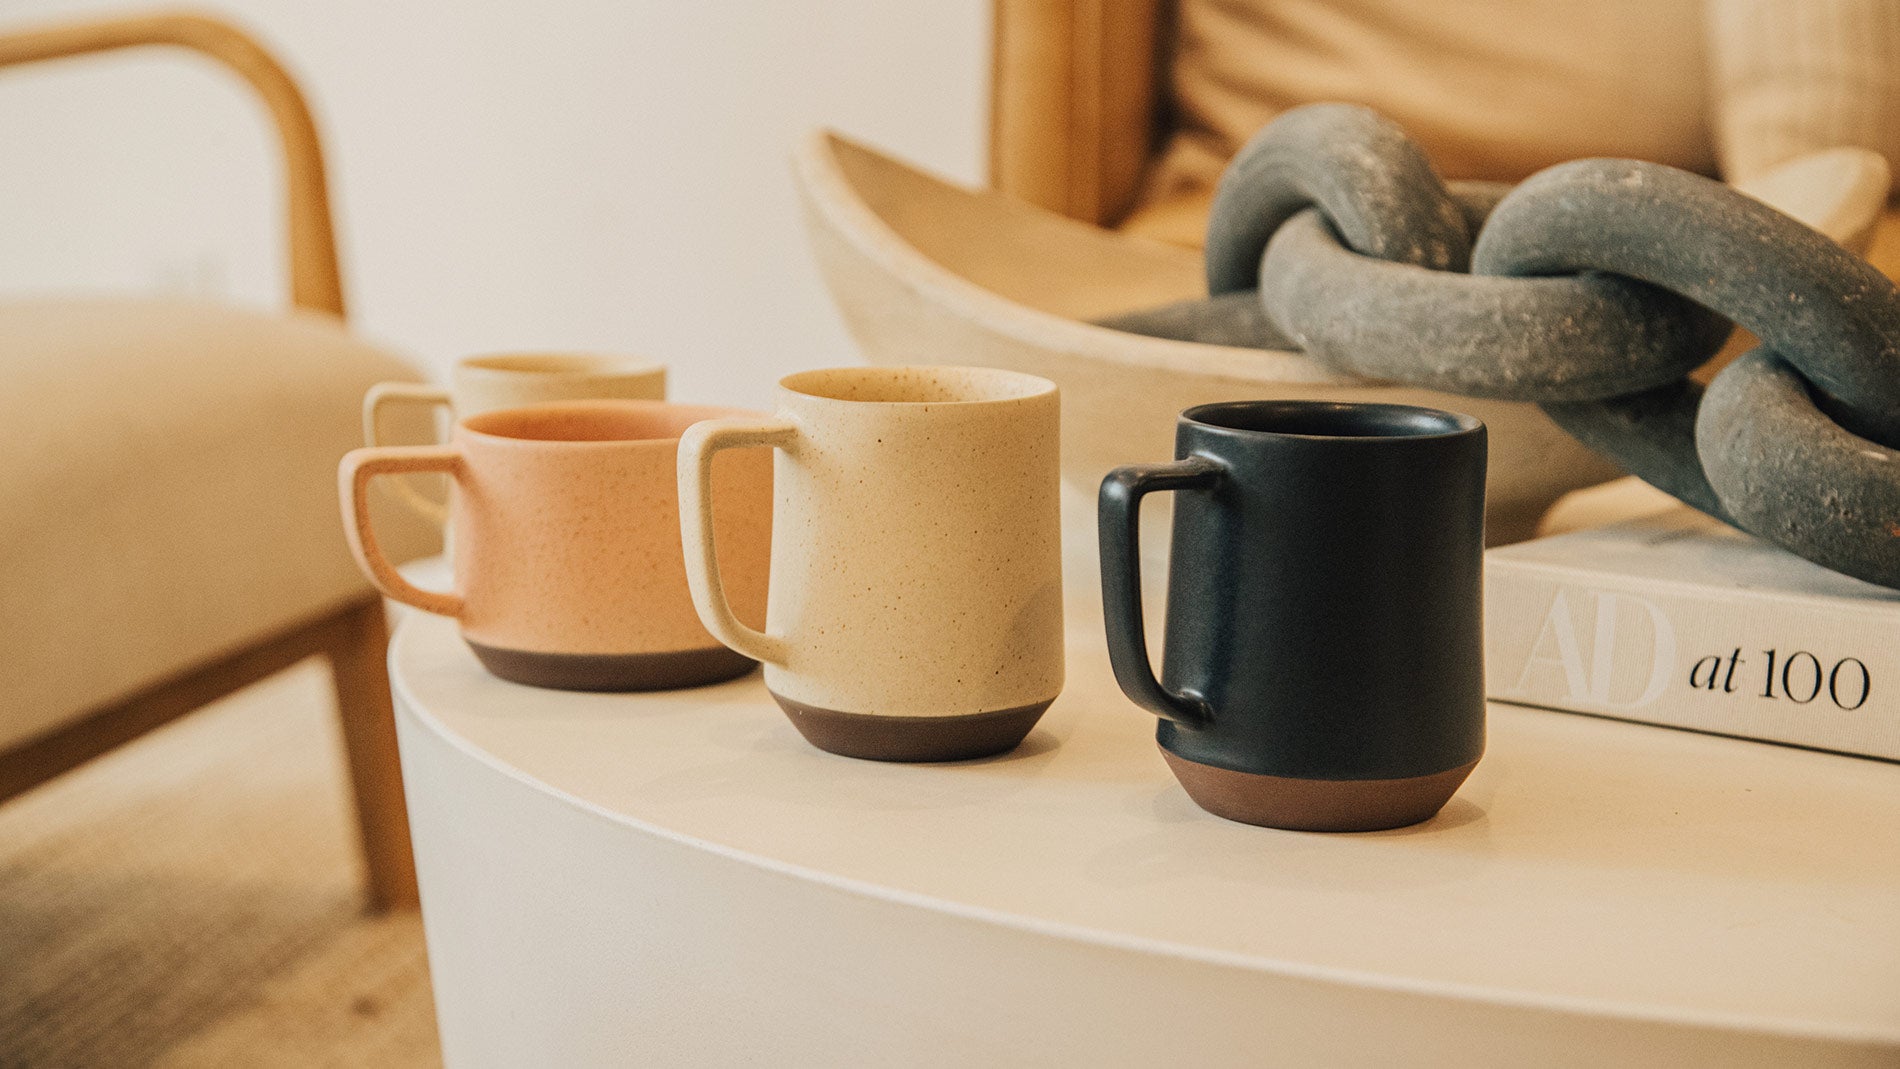 A collection of different Mazama mugs on a circular coffee table.